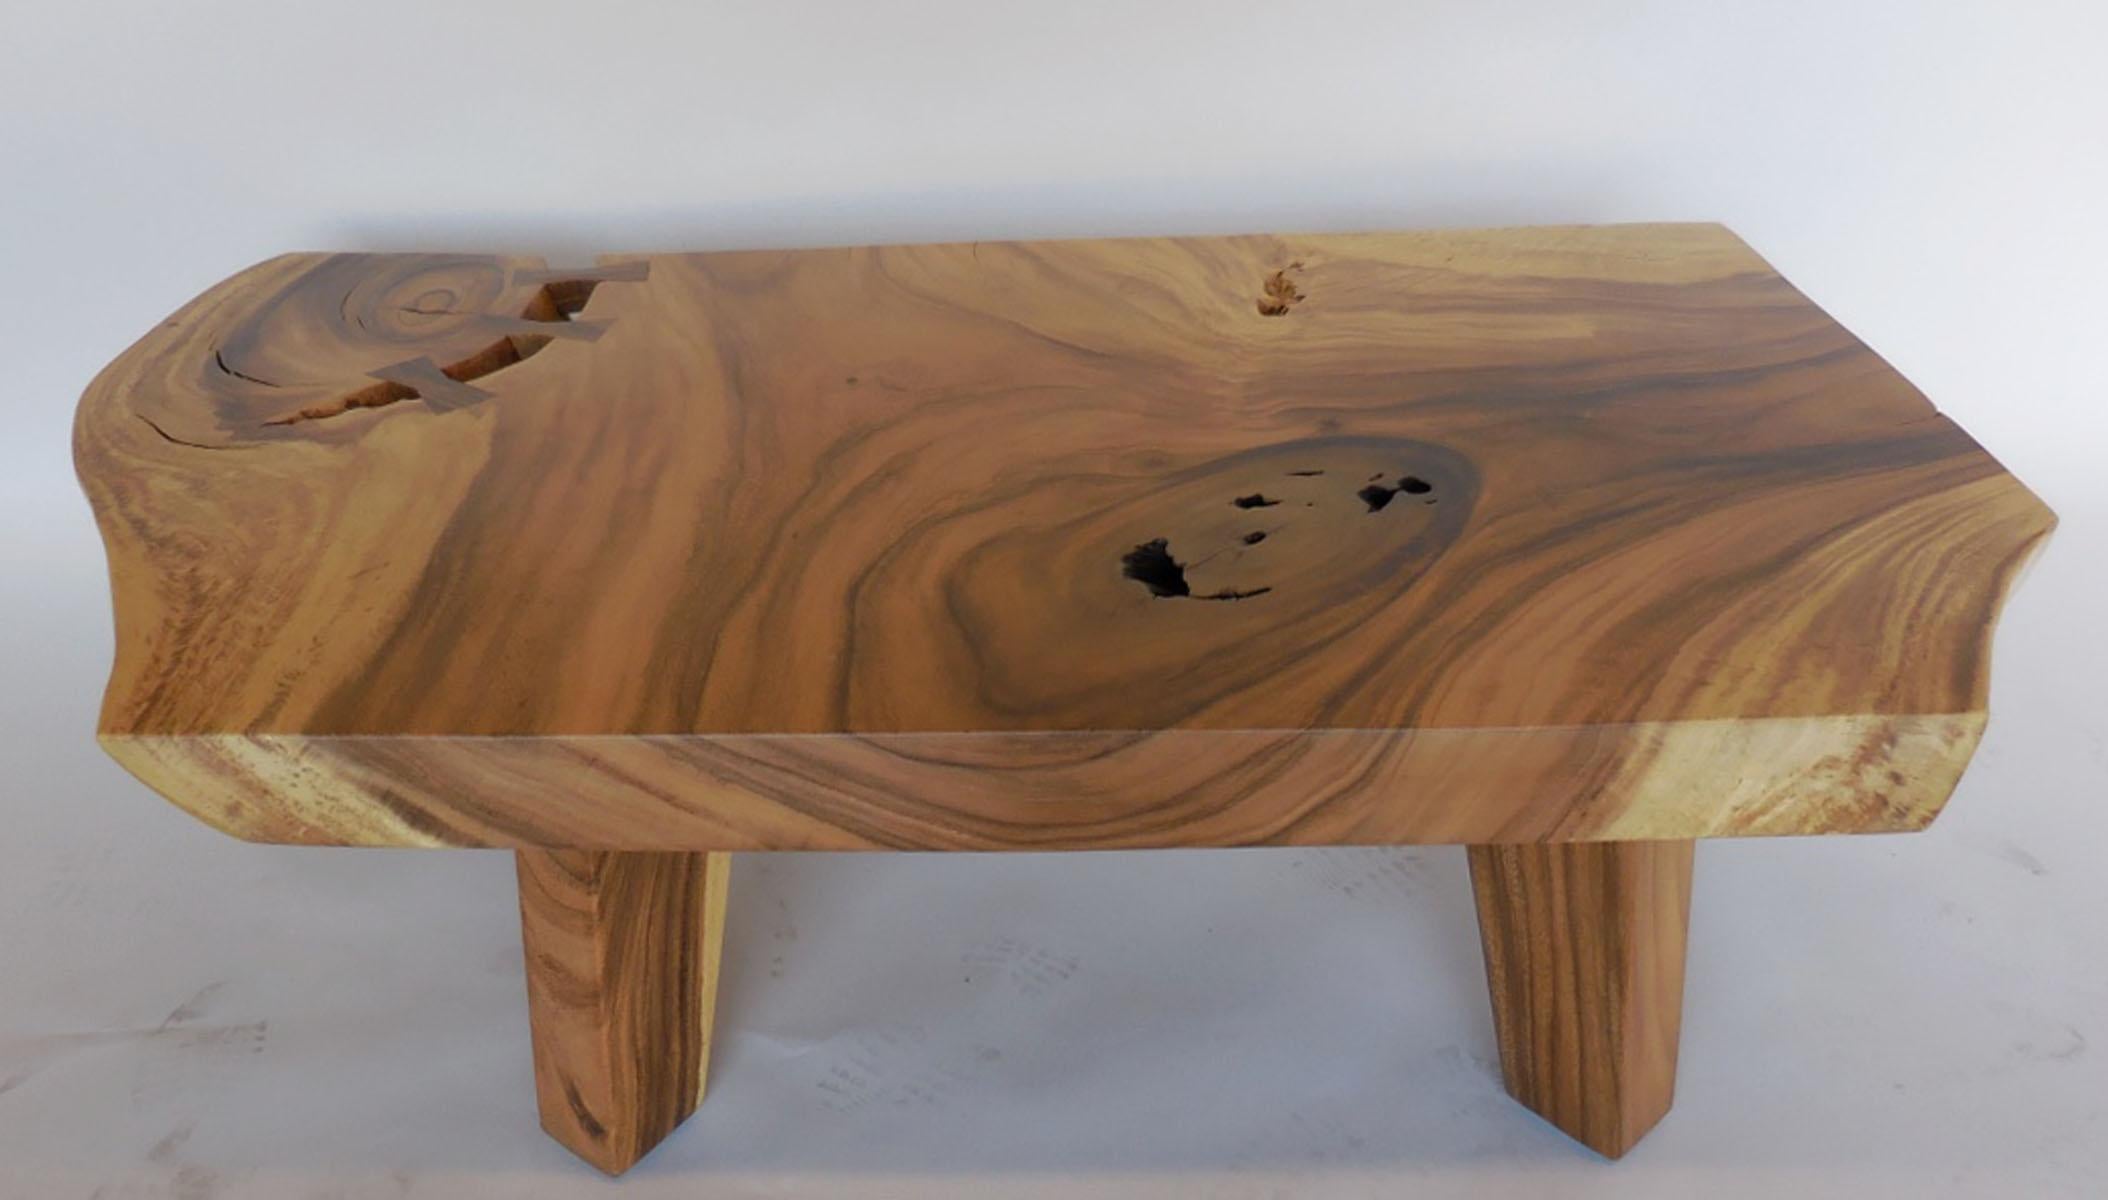 Beautiful Albezia wood table. The top is a one wide board, sagittally cut and solid top measuring 3.5 inches thick and has a live, undulating edge. The natural crevice of a knot is accentuated with three wooden mariposas (butterflies).
The graining